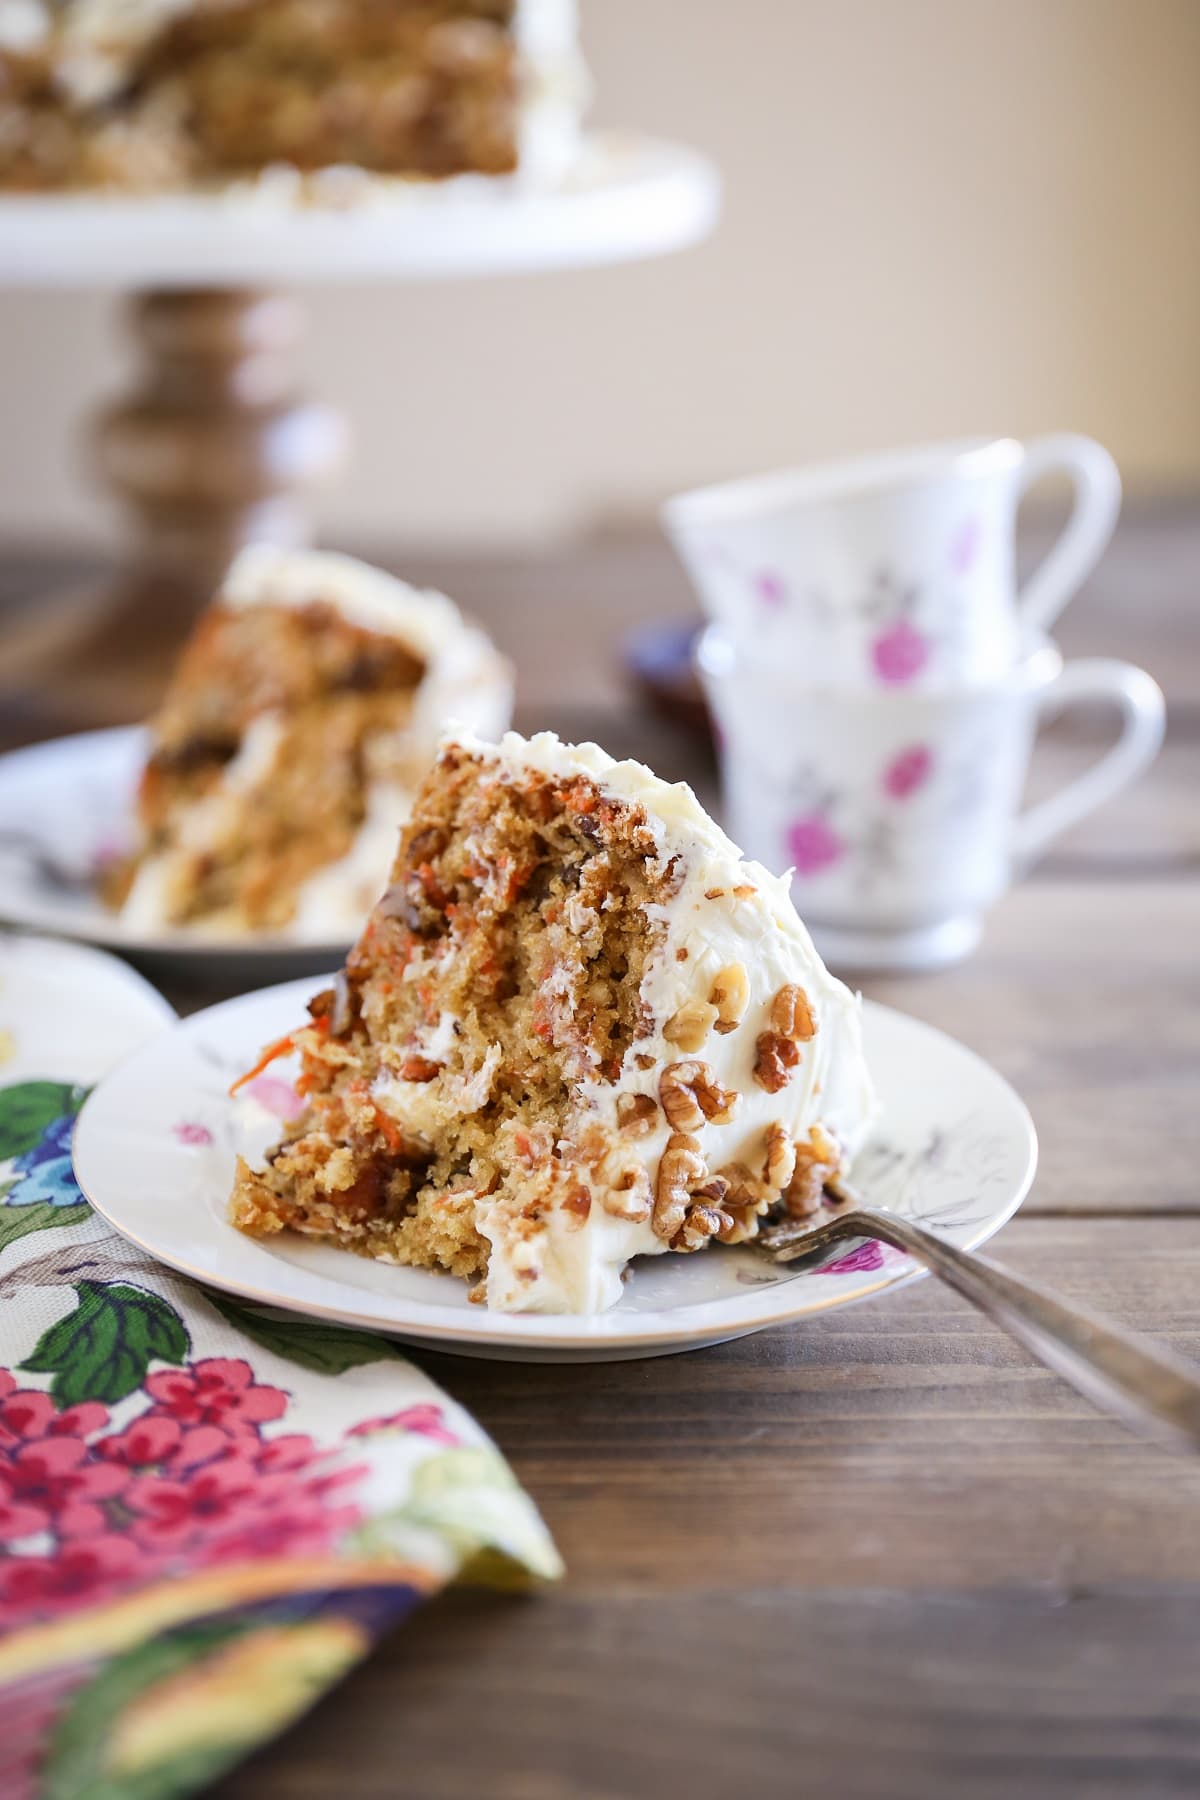 Two slices of healthy carrot cake made with almond flour on plates with cups of tea.